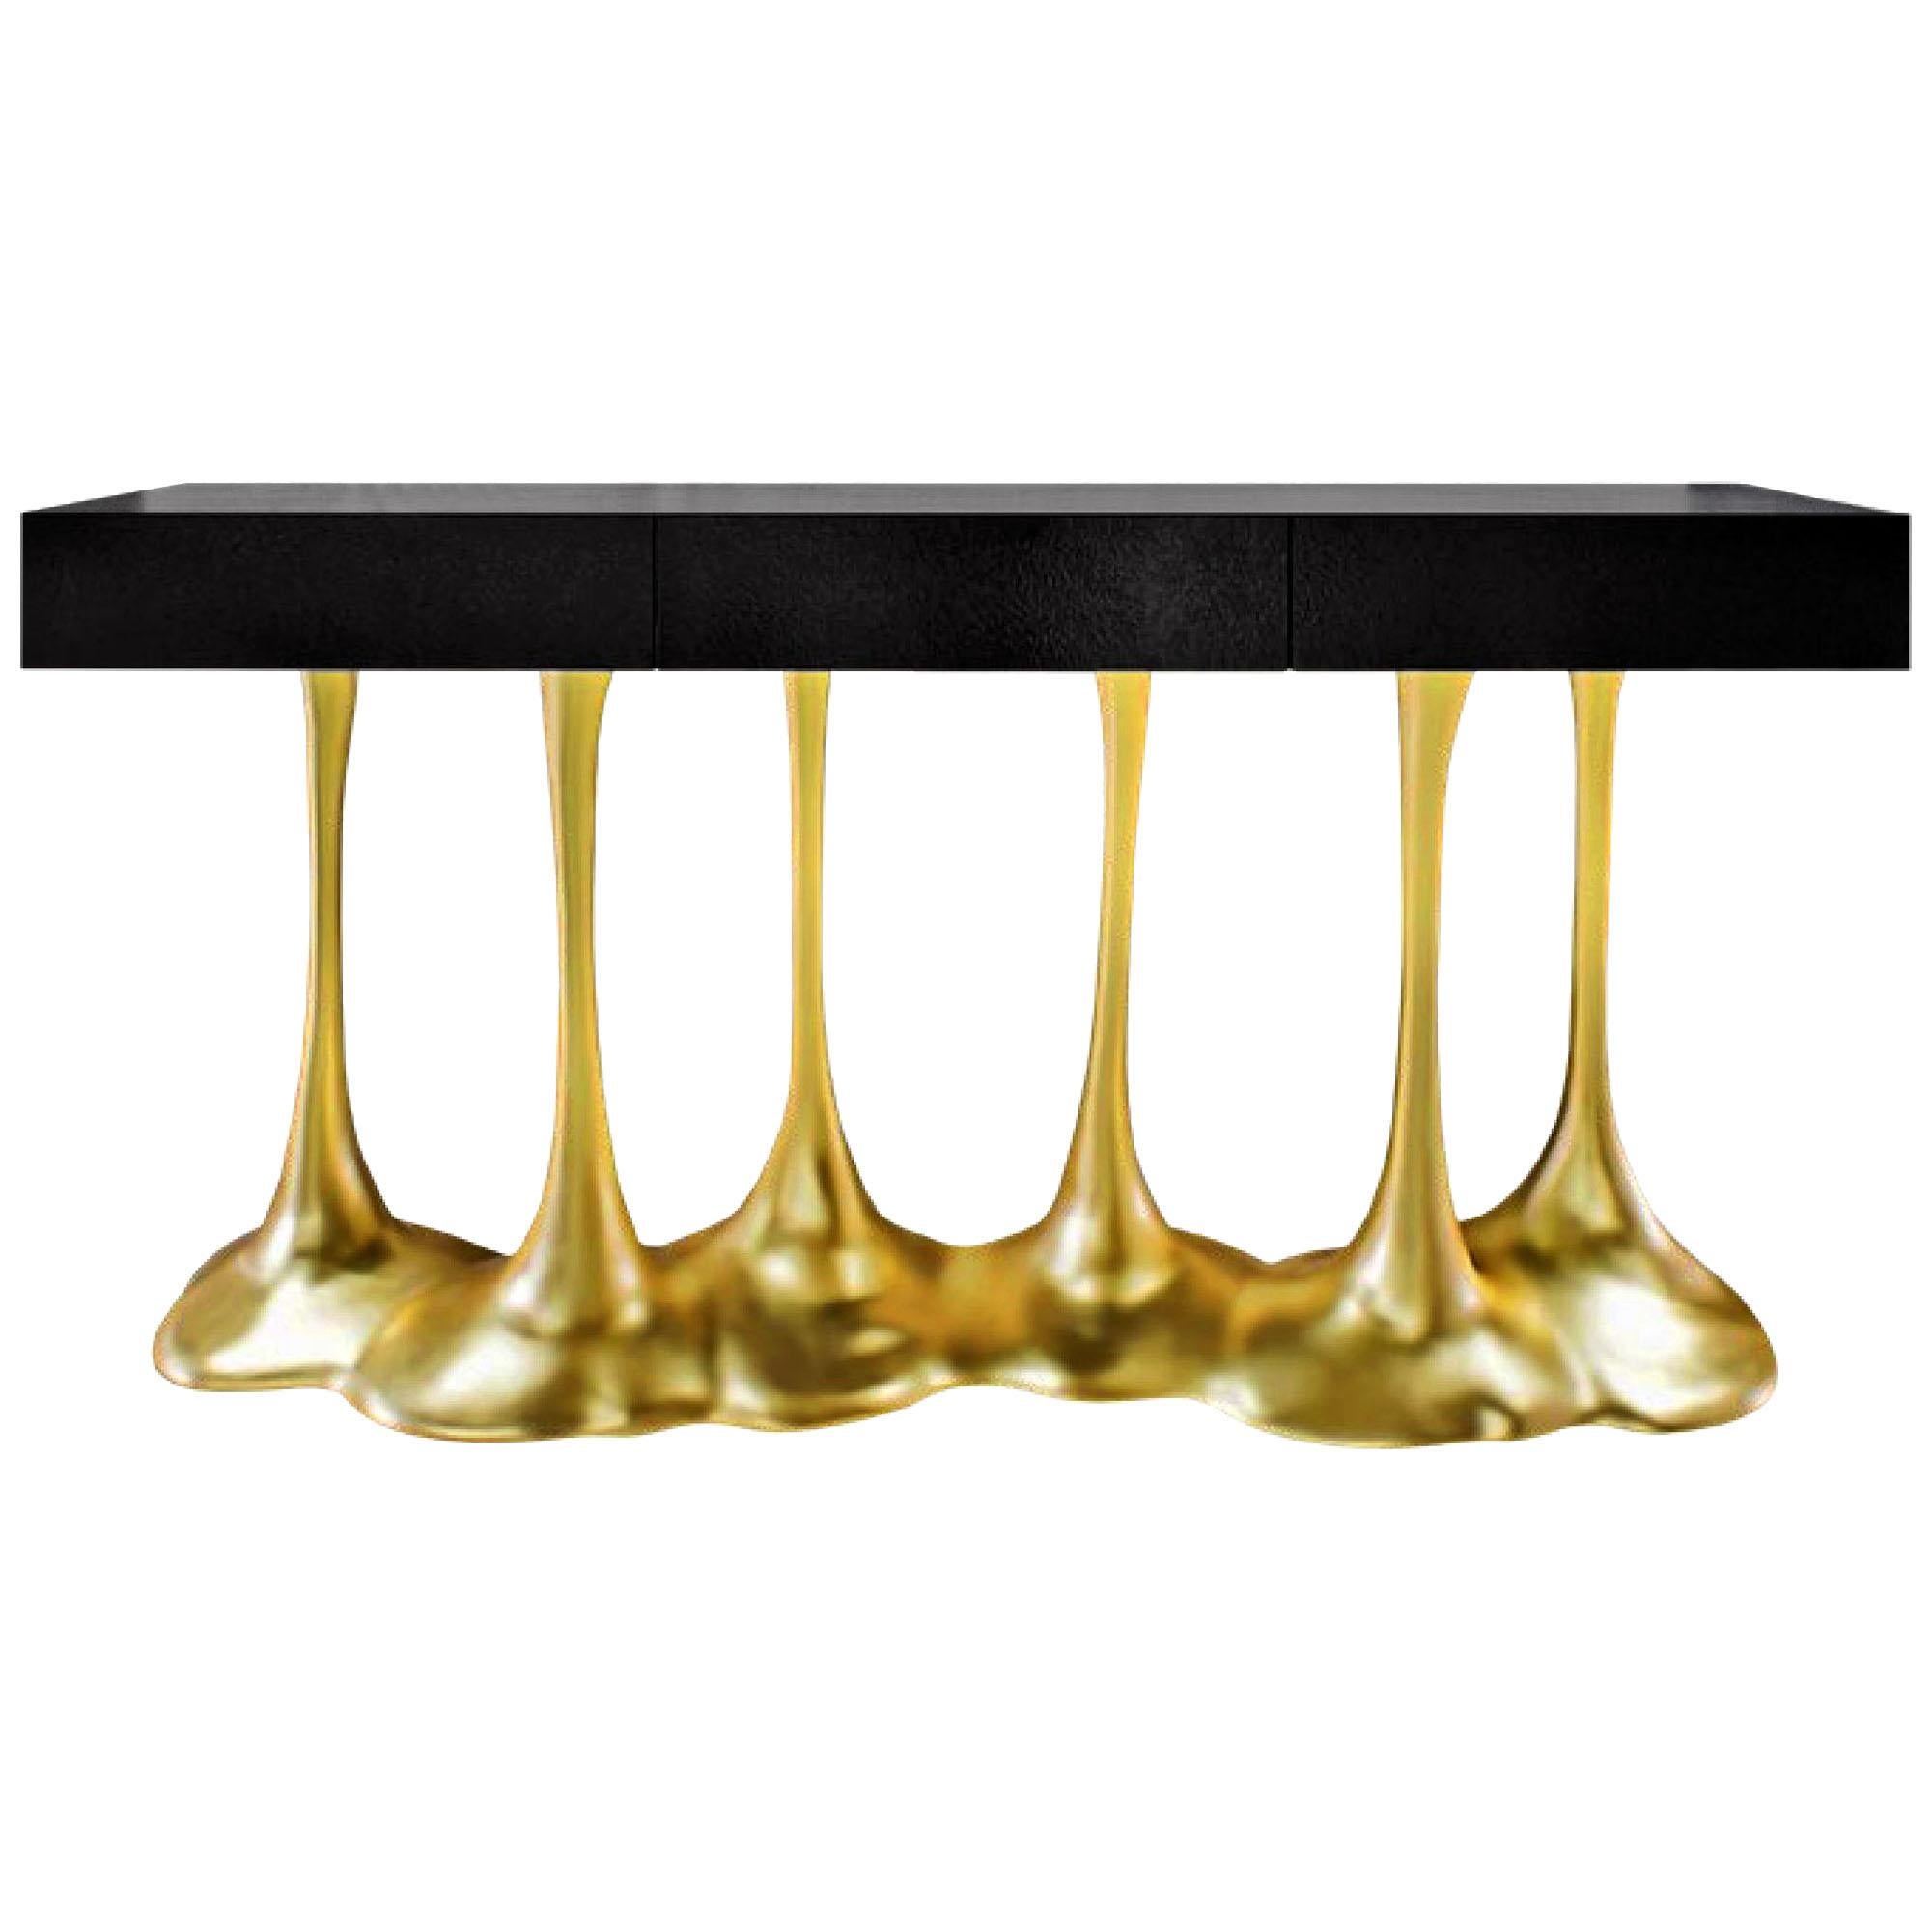 Sculptural and Luxurious "Argos" Futuristic Console Table in Black and Gold